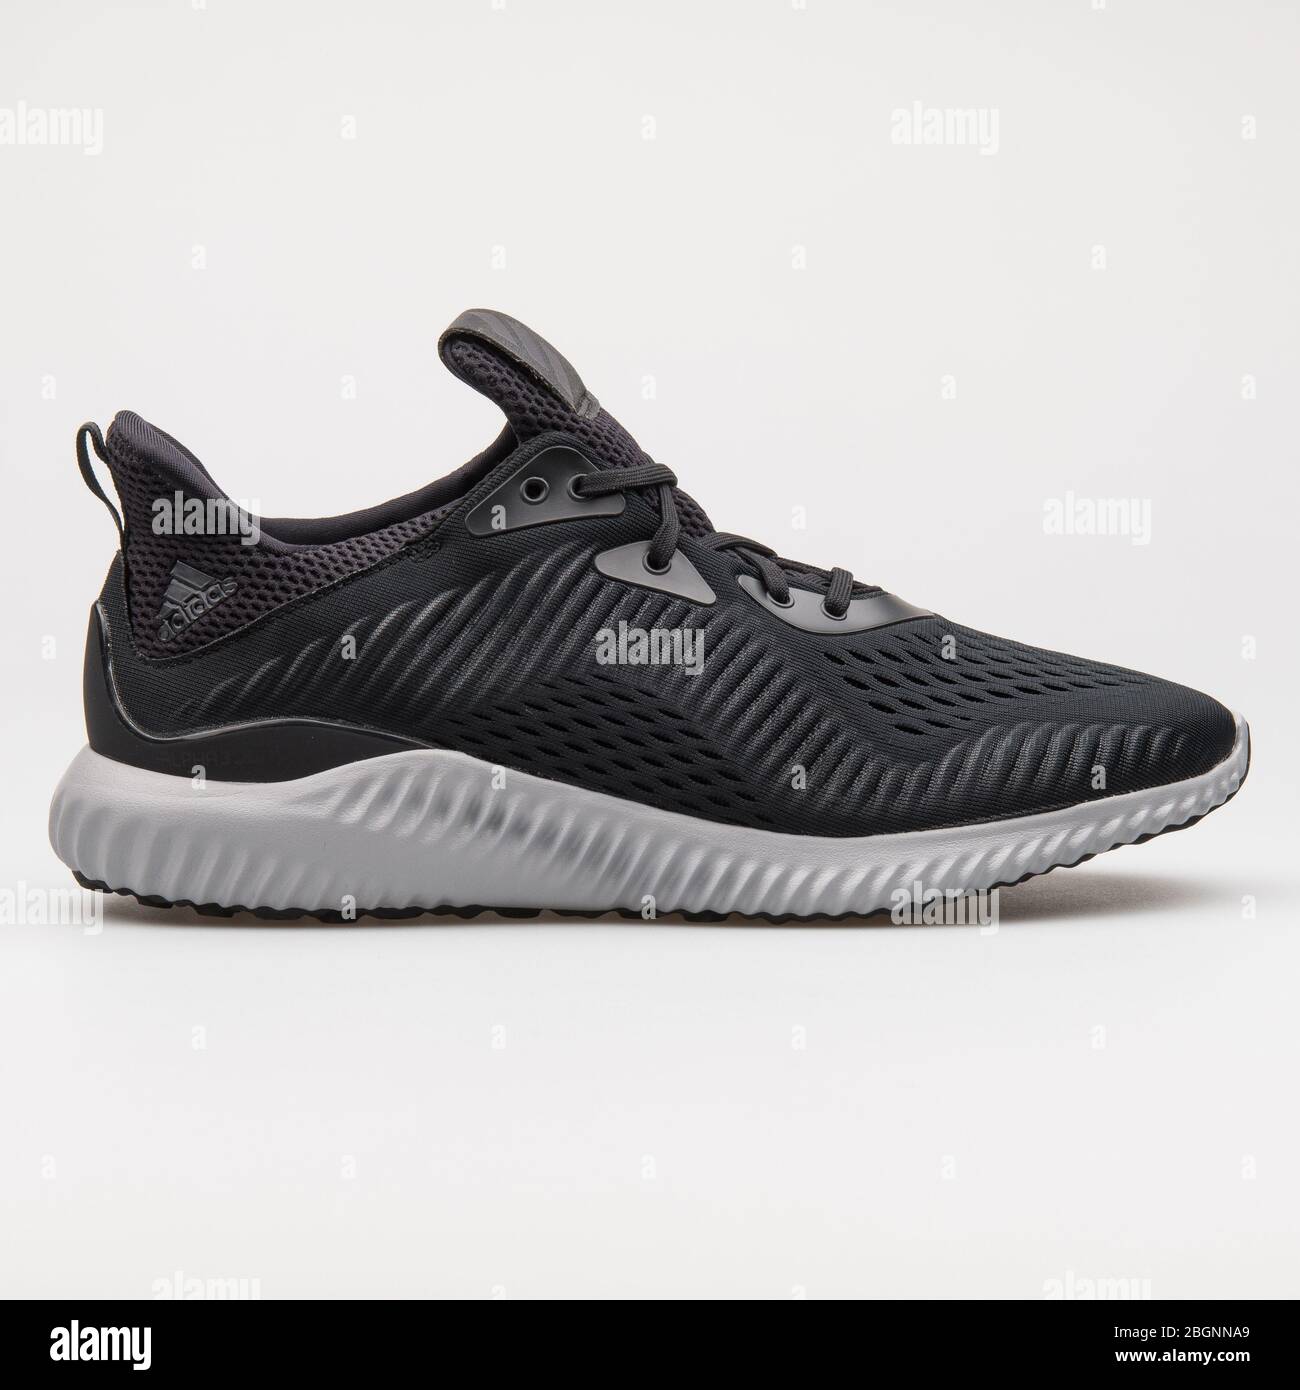 VIENNA, AUSTRIA - AUGUST 16, 2017: Adidas Alphabounce EM black and grey  sneaker on white background Stock Photo - Alamy